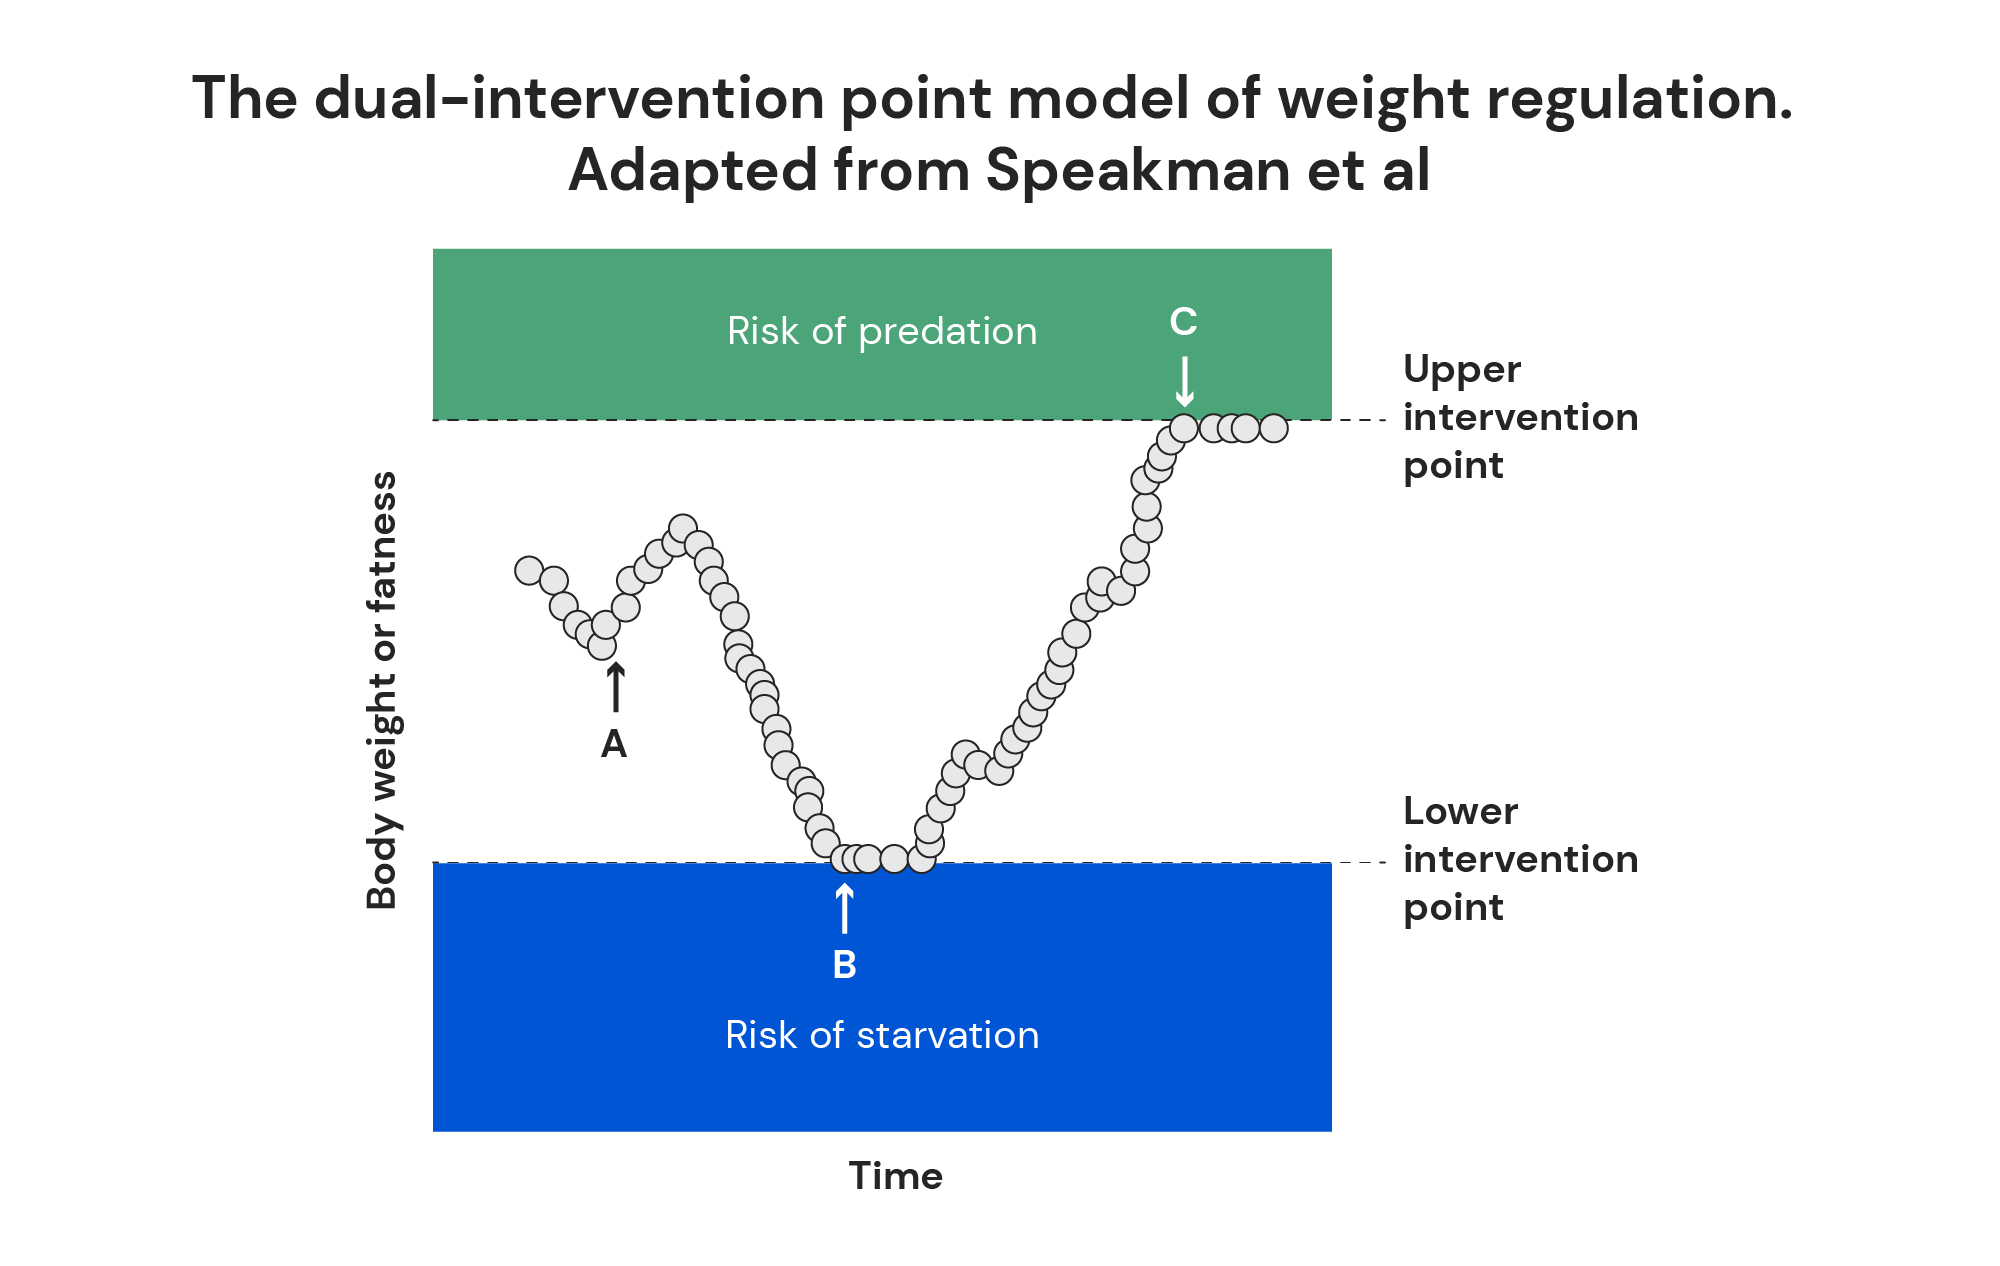 The dual-intervention point model of weight regulation